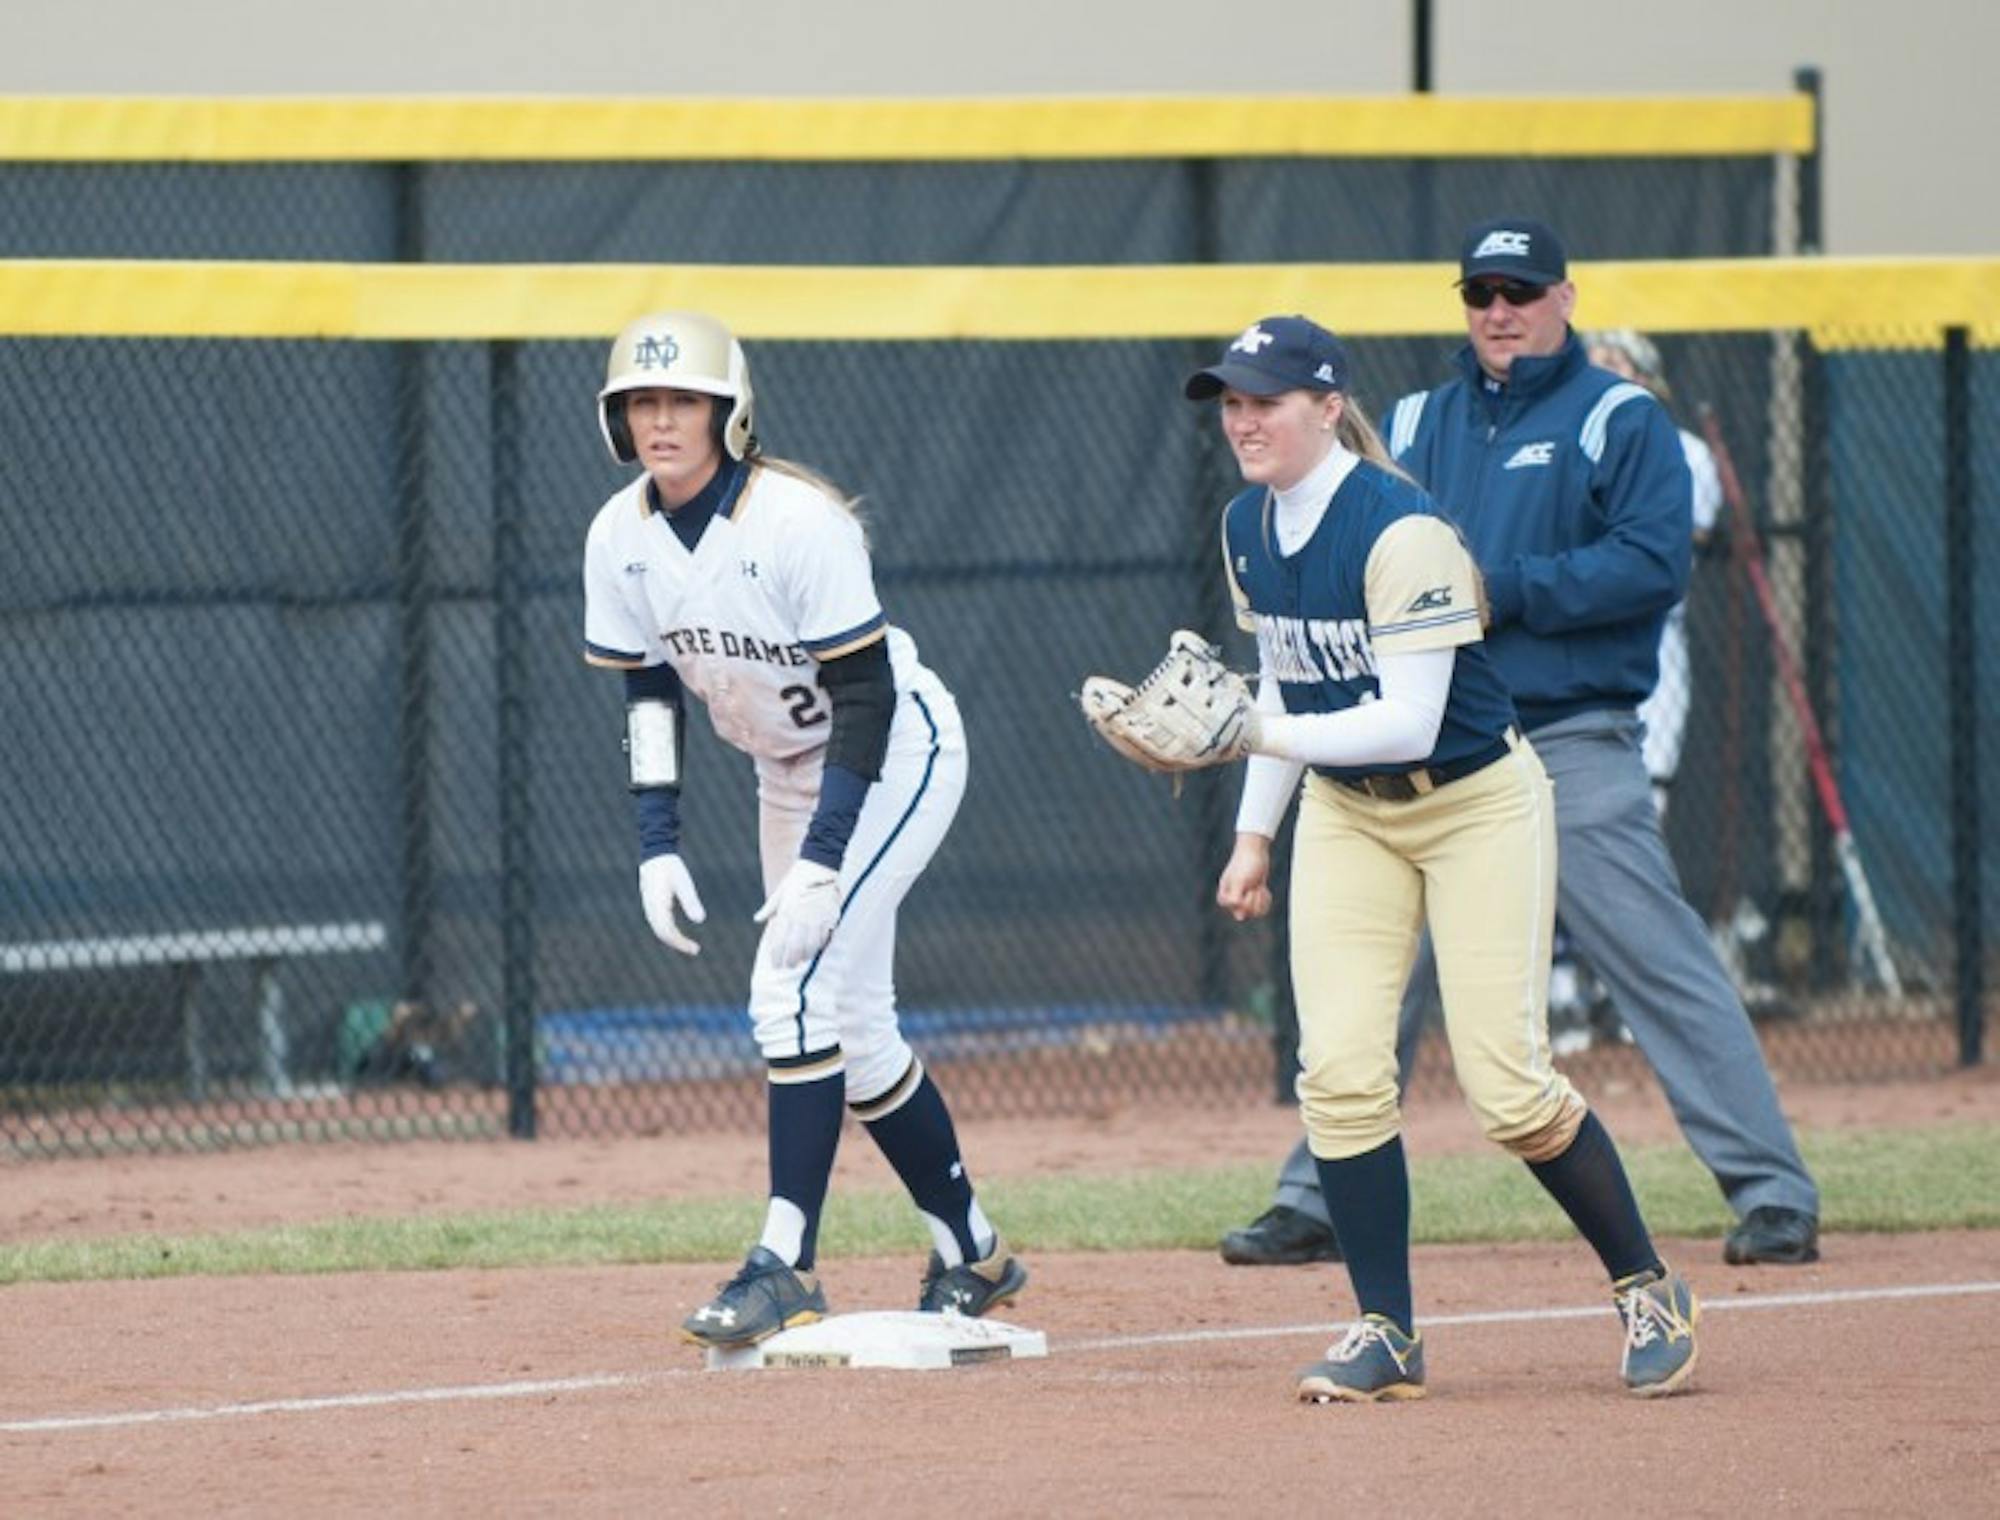 Irish sophomore outfielder Karley Wester waits on a pitch during a win against Georgia Tech on March 21 at Melissa Cook Stadium.